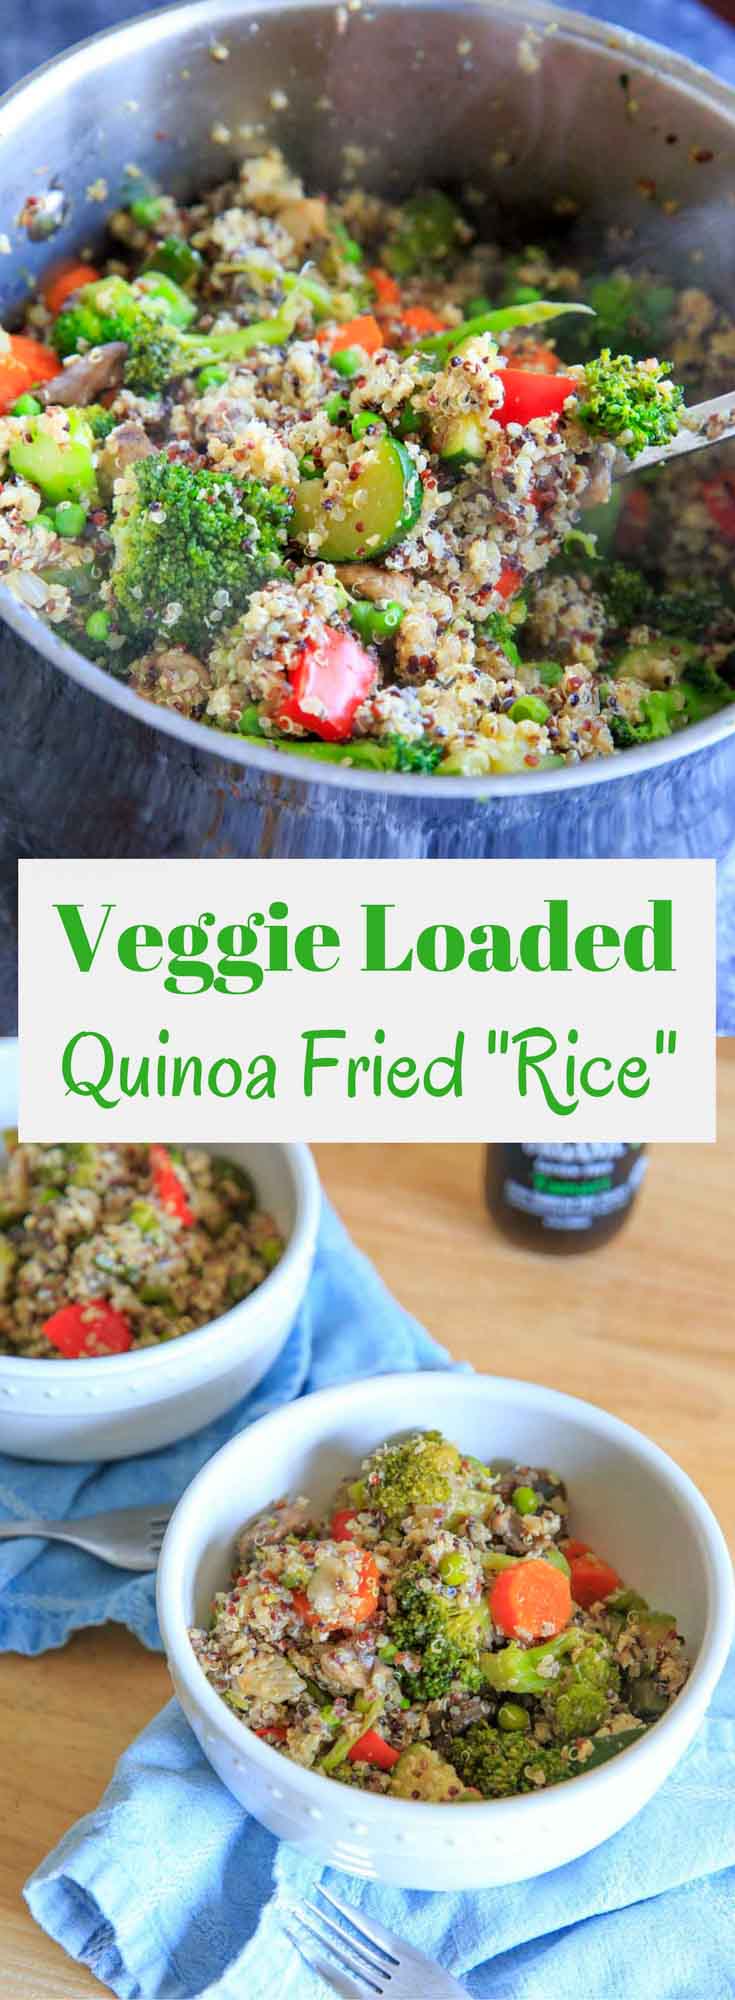 Veggie Loaded Quinoa Fried "Rice" - Trial and Eater